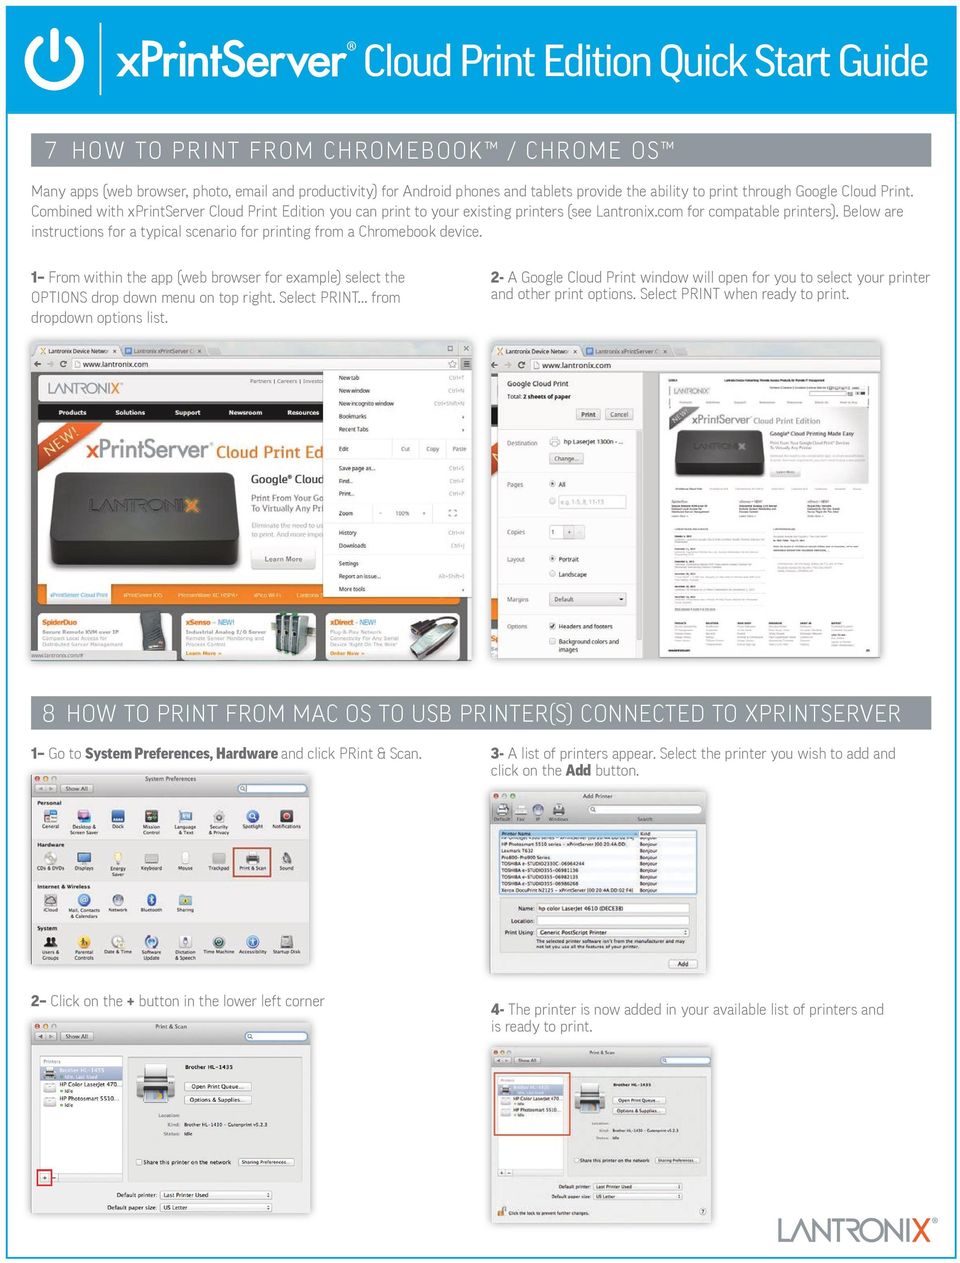 Below are instructions for a typical scenario for printing from a Chromebook device. 1 From within the app (web browser for example) select the OPTIONS drop down menu on top right.